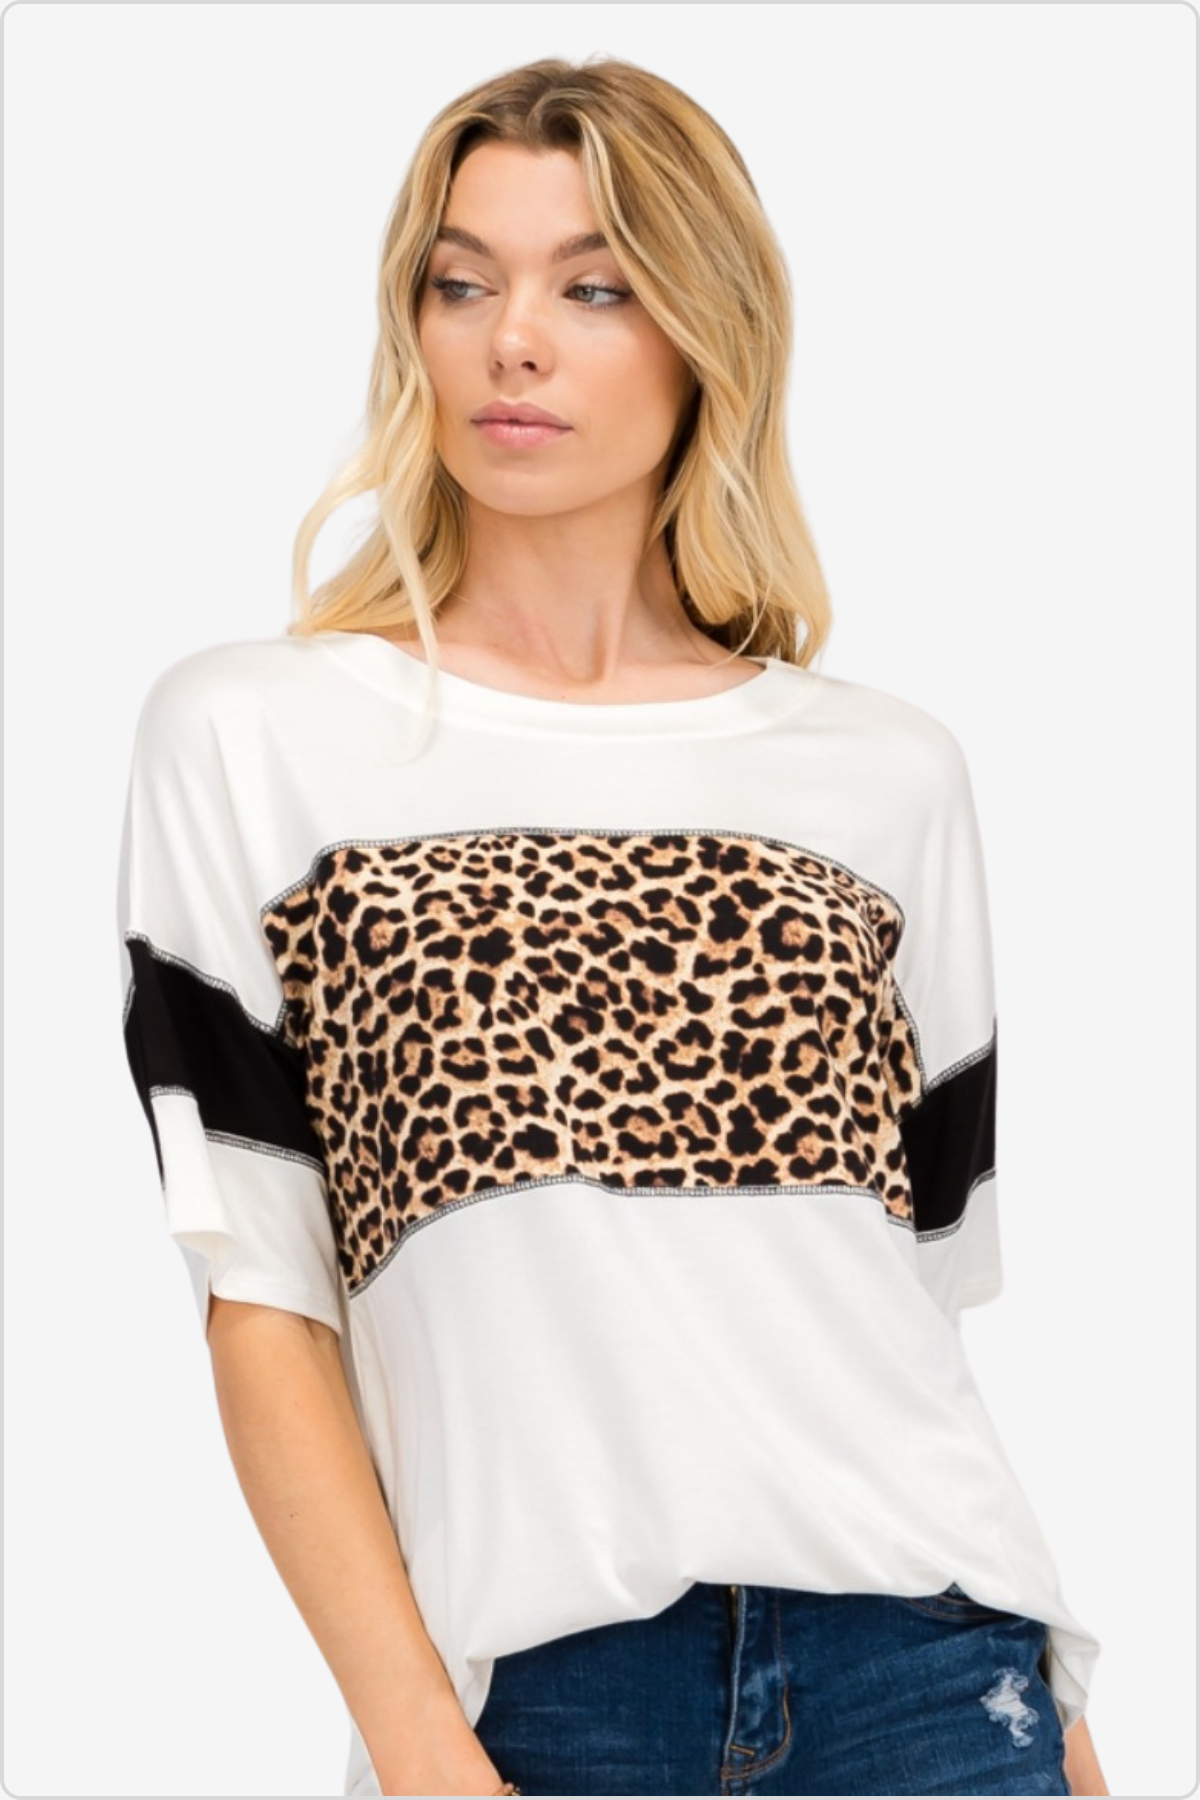 Woman in white top with leopard print detail, a bold urban fashion statement.